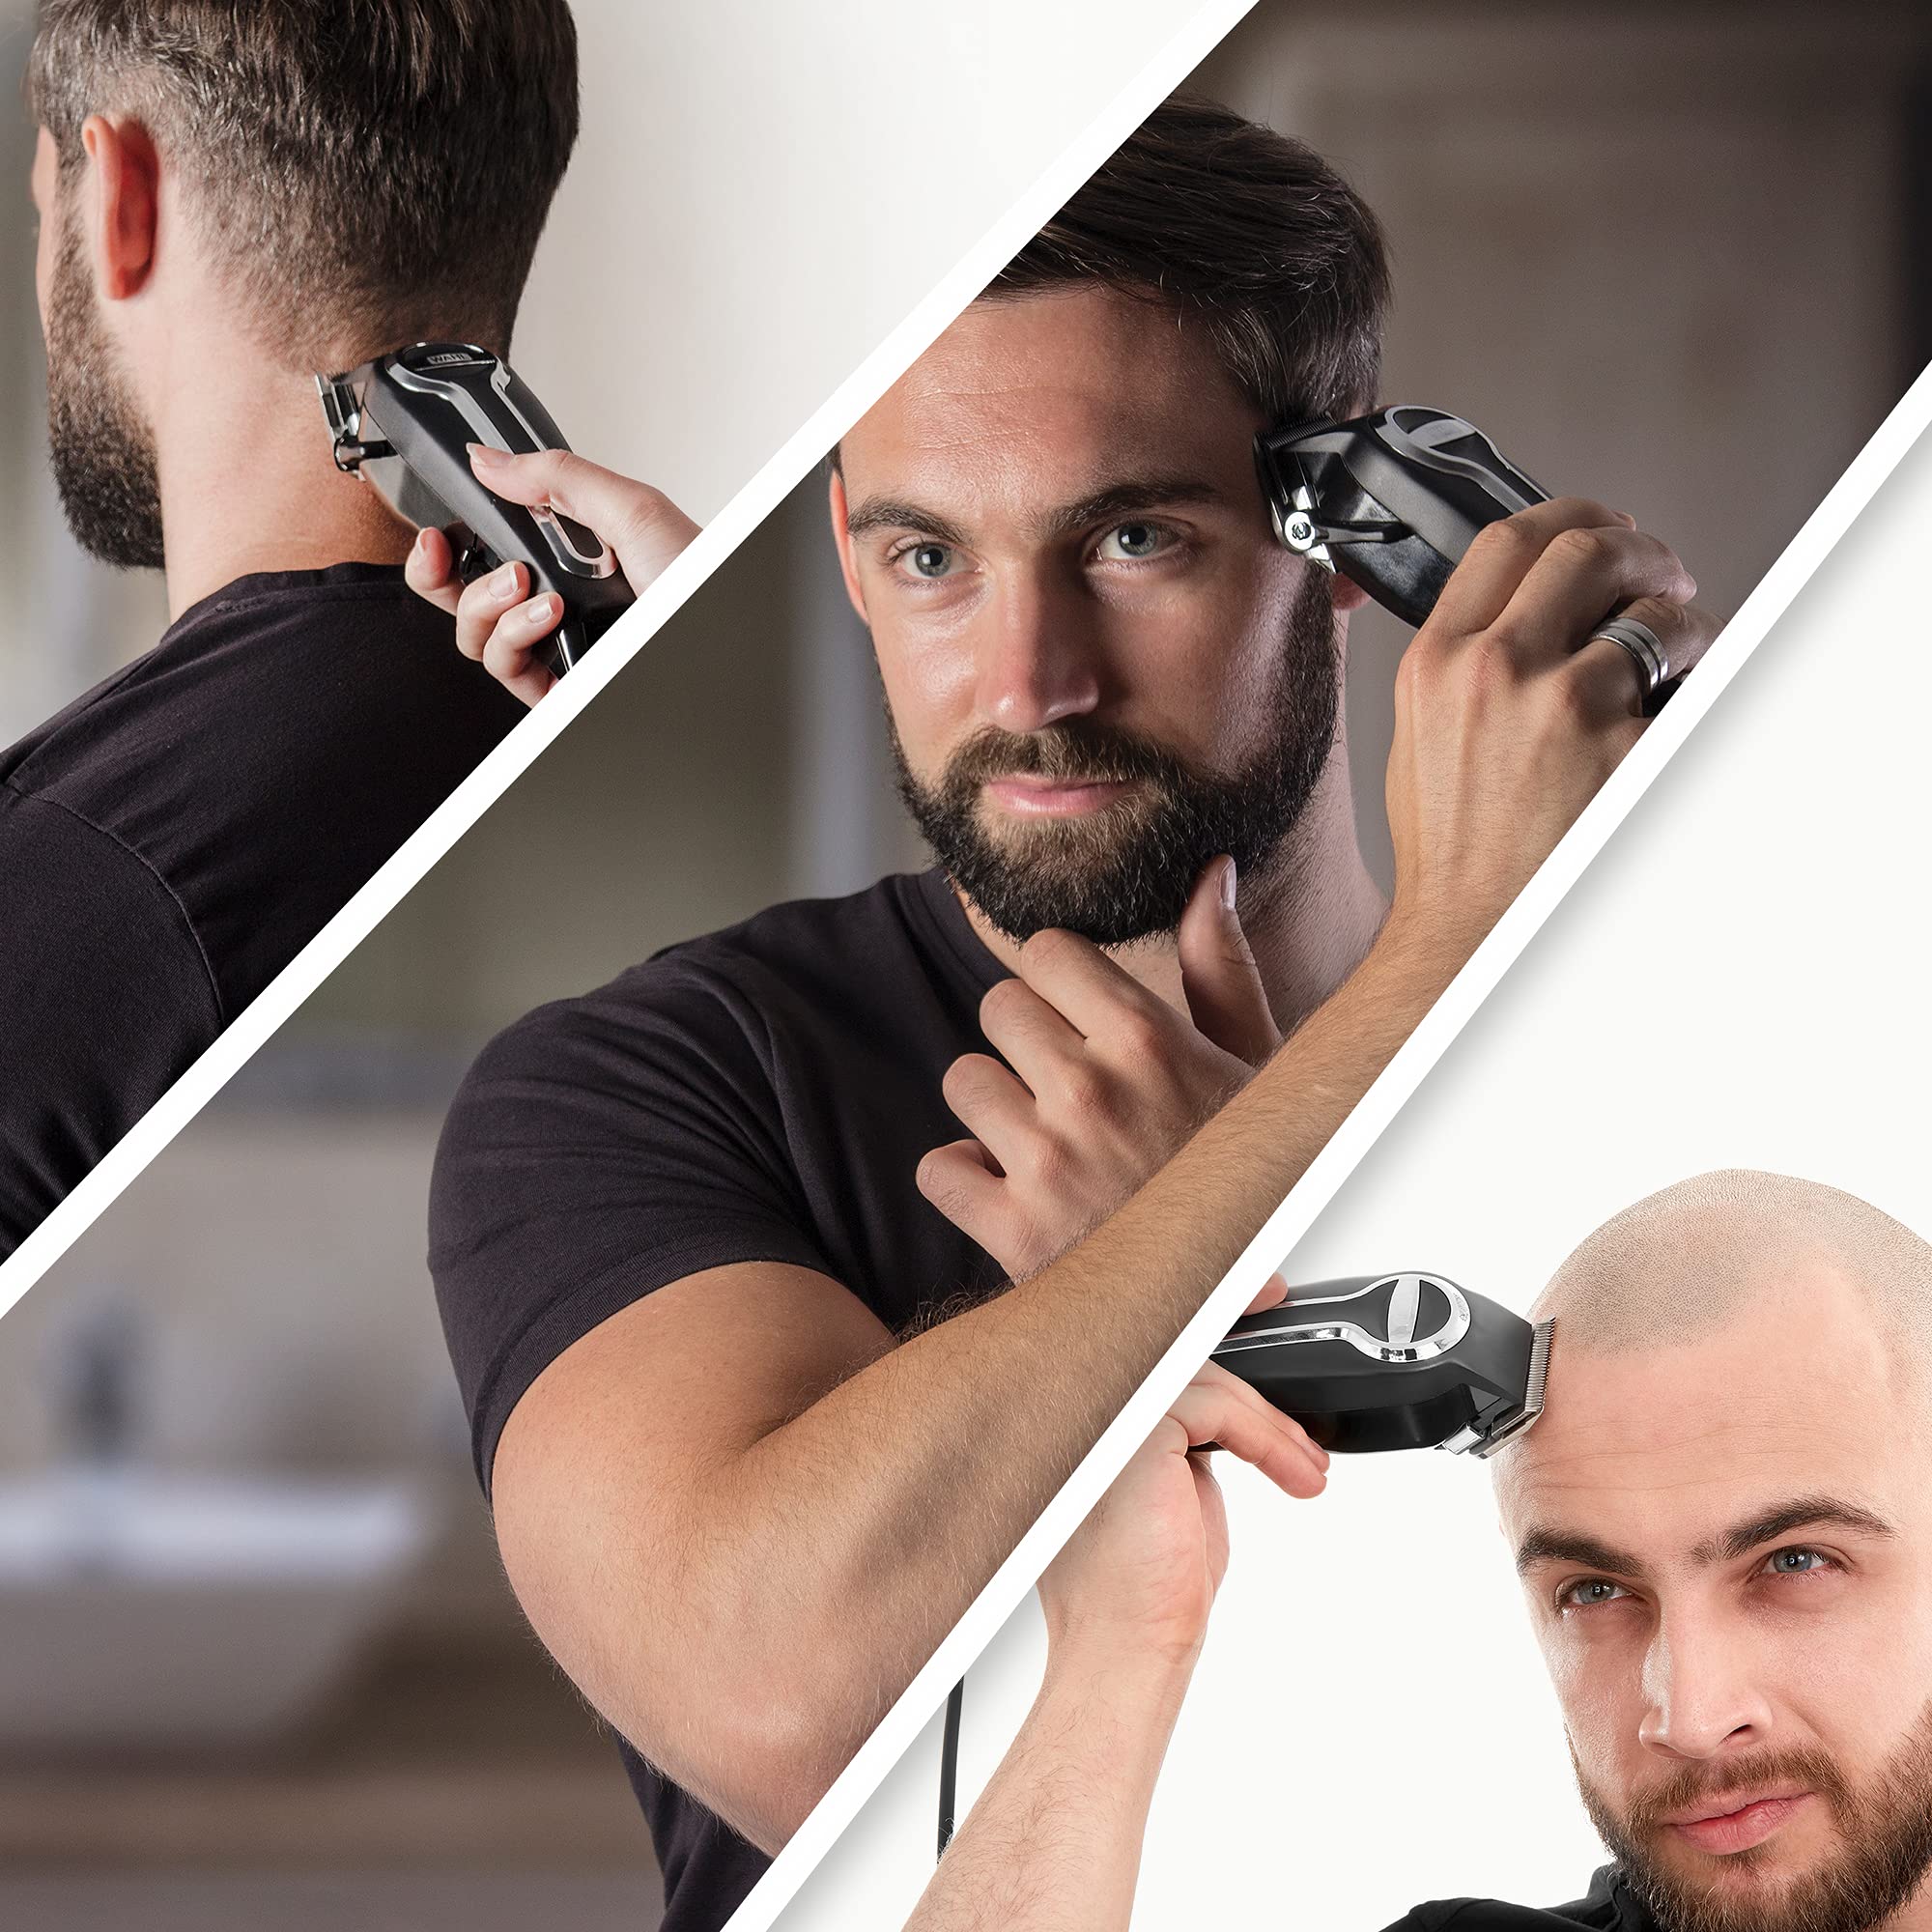 WAHL Elite Pro Hair Cutting Kit, Corded Hair Clipper For Men, Head Shaver, Self Sharpening Precision Blades With Taper Lever, Powerful And Durable Motor, Secure-Fit Premium Guide Combs, 79602-300